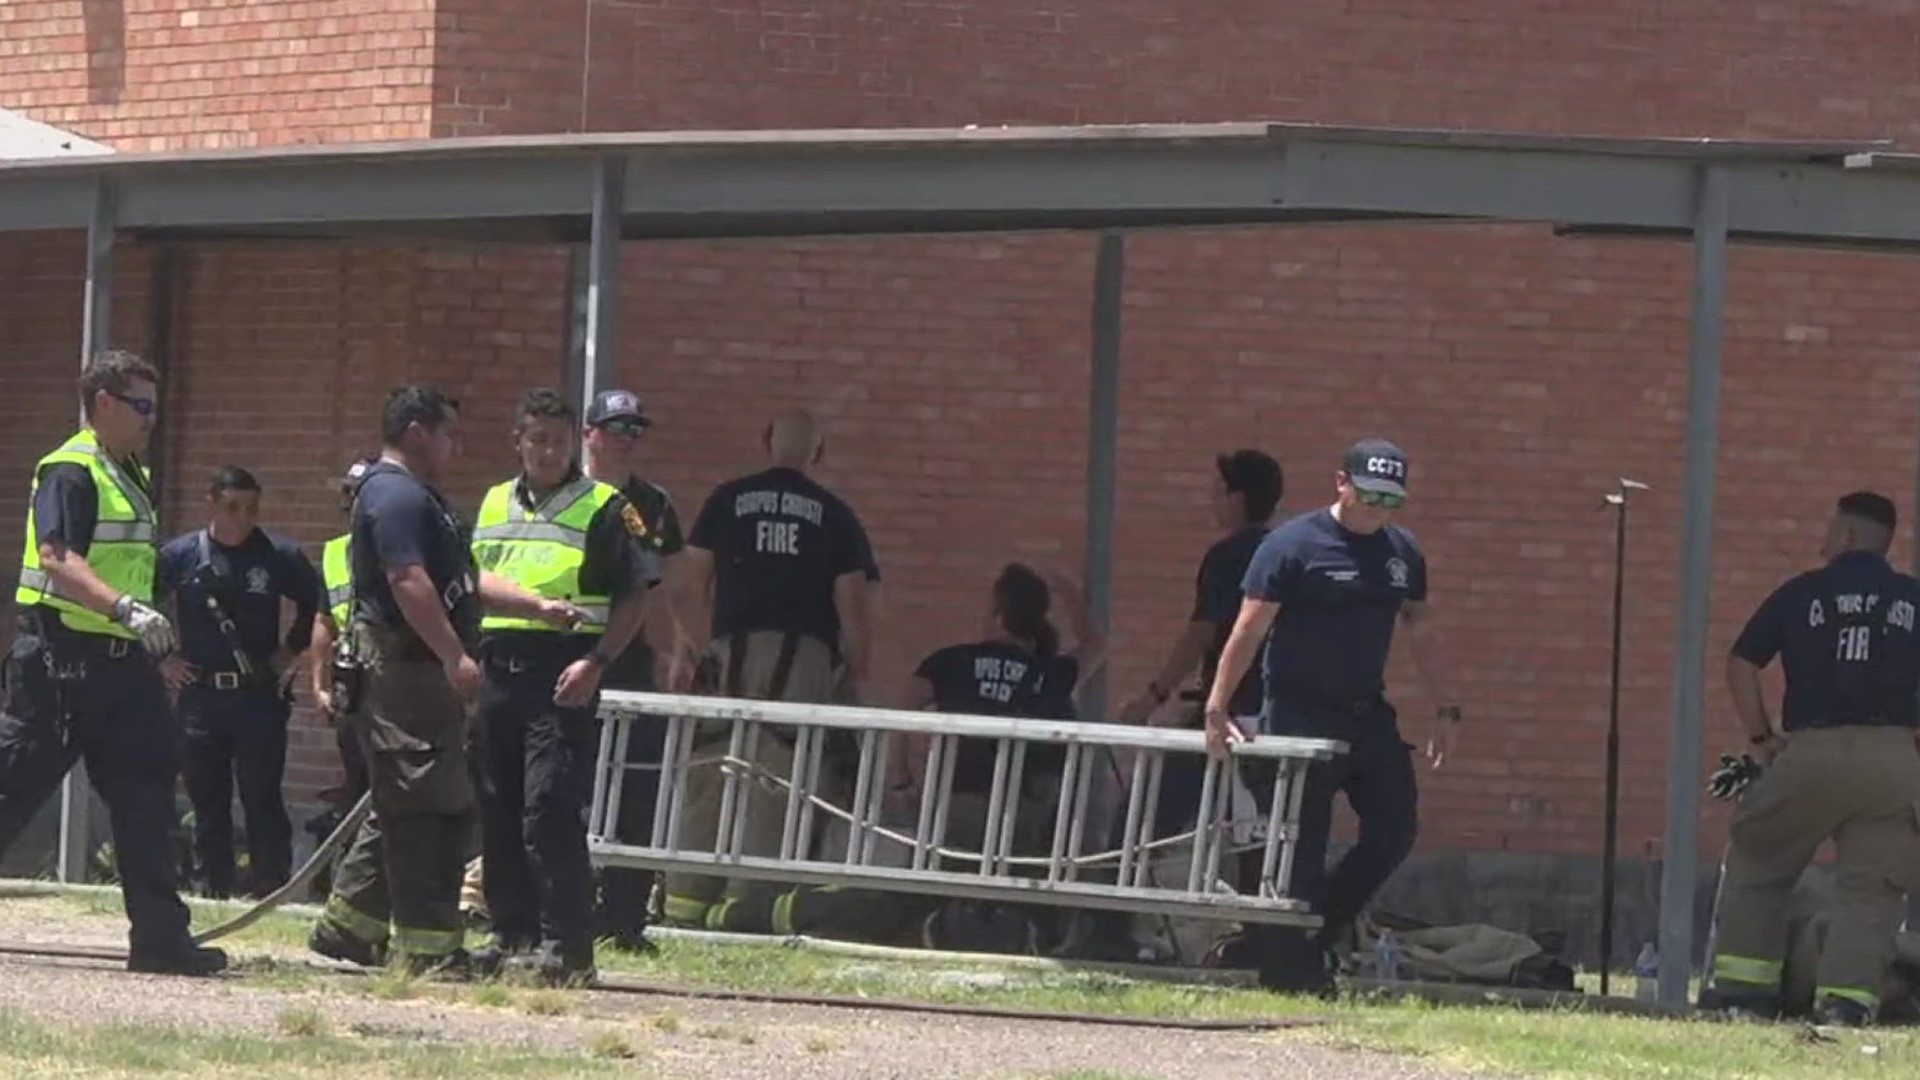 No injuries were reported, and students were evacuated to the Calk-Wilson Elementary gym